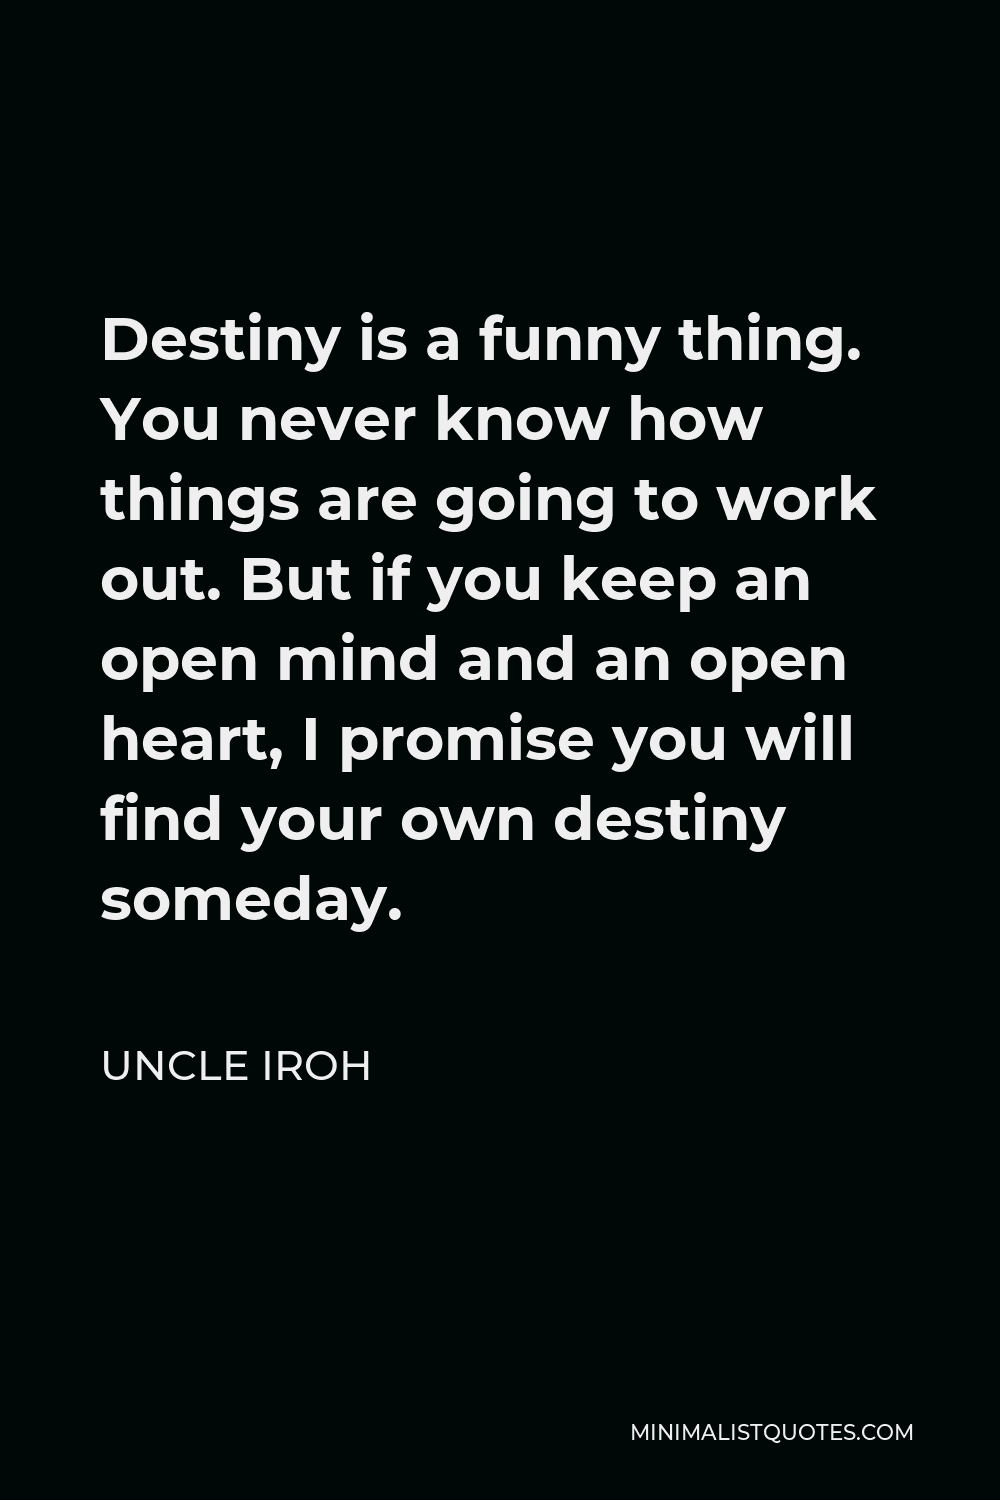 Uncle Iroh Quote: Destiny is a funny thing. You never know how things are  going to work out. But if you keep an open mind and an open heart, I  promise you